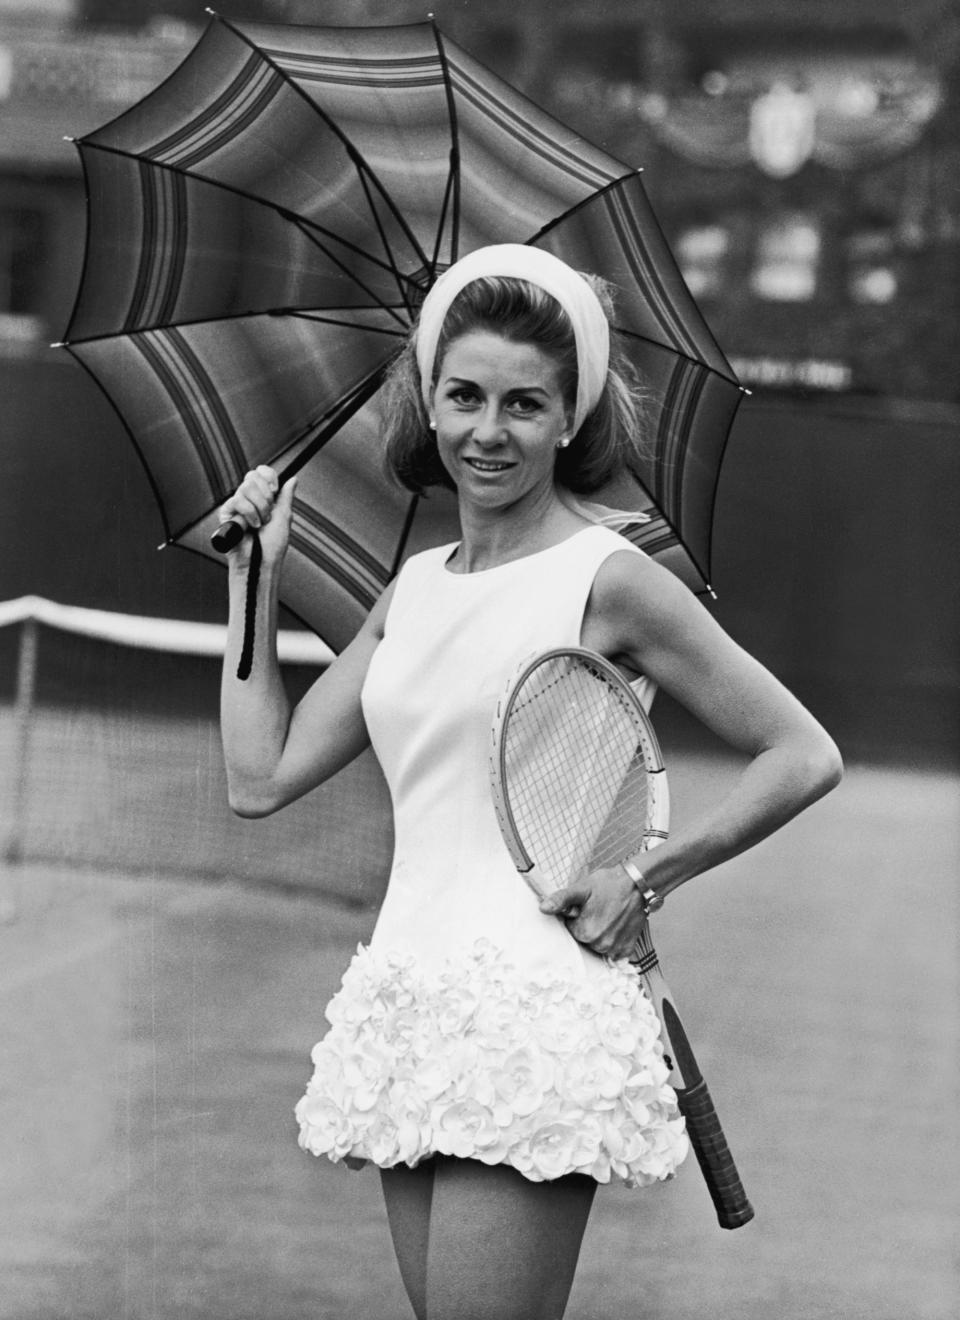 23rd June 1965: Italian tennis star Lea Pericoli wearing a rose-trimmed tennis dress designed by British sportwear designer Teddy Tinling at Wimbledon. (Photo by Keystone/Getty Images)